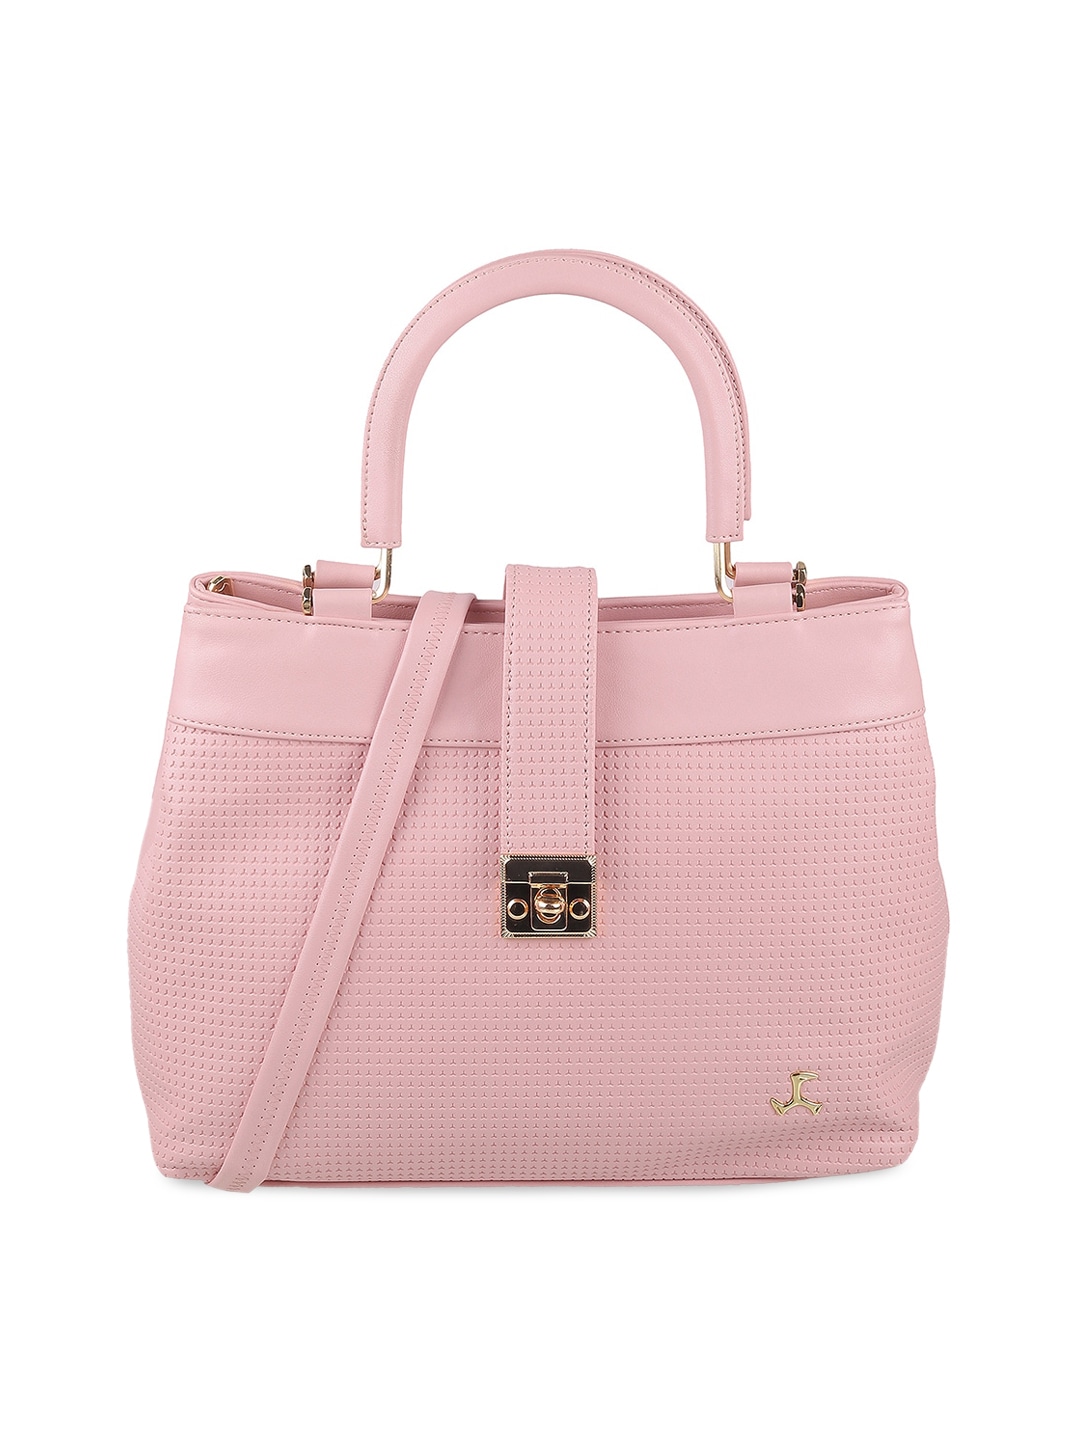 Mochi Pink Structured Handheld Bag Price in India